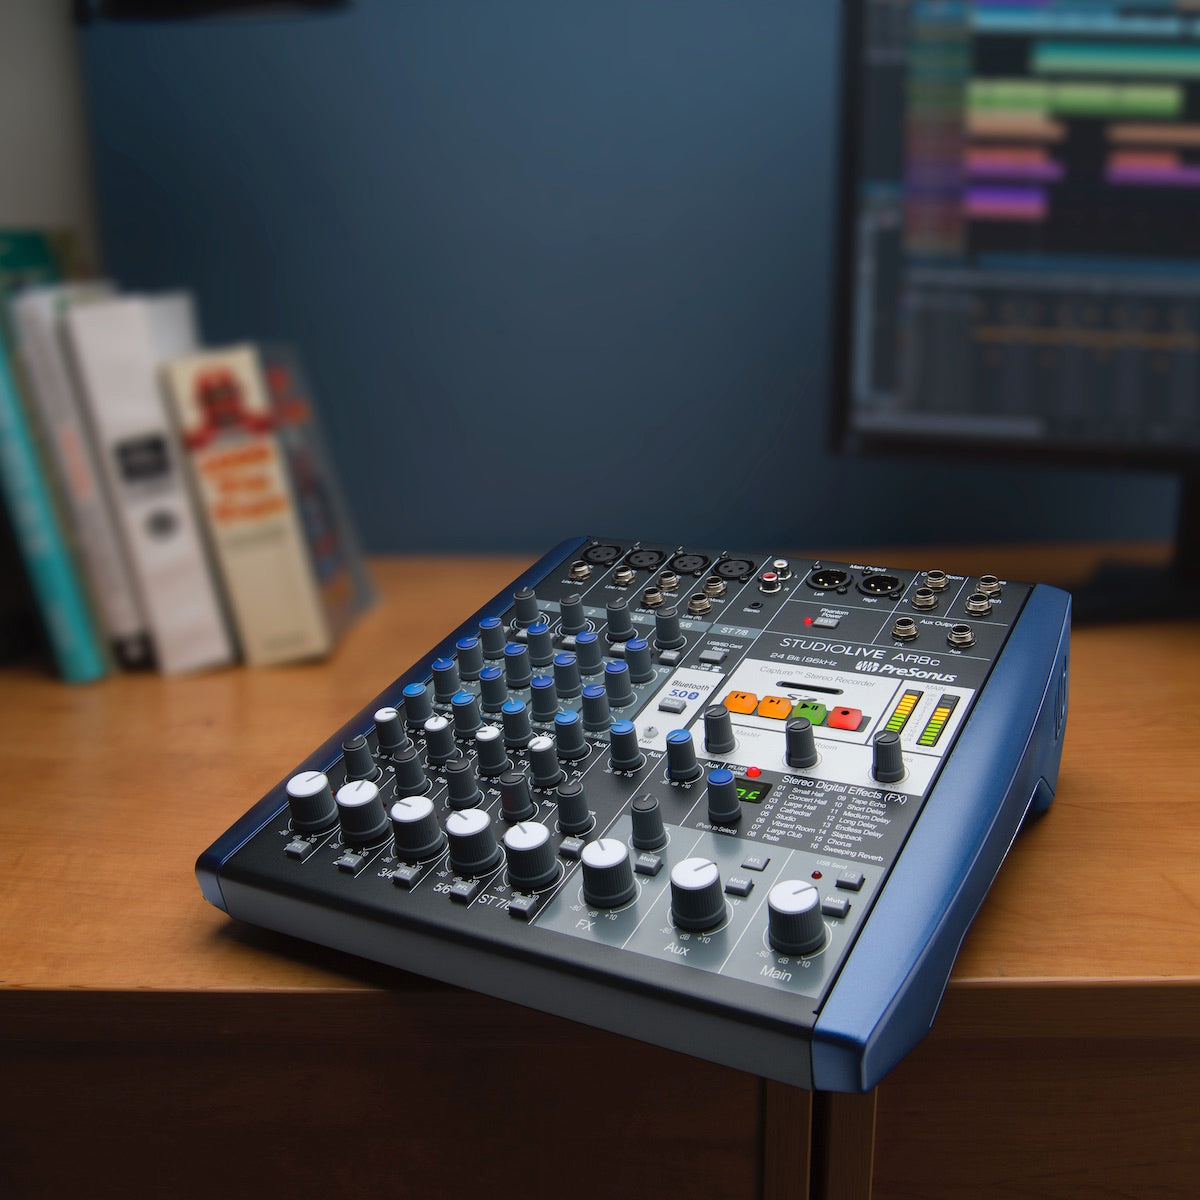 PreSonus StudioLive AR8c - 8-channel Analog USB-C Mixer with Effects, shown in a home recording studio